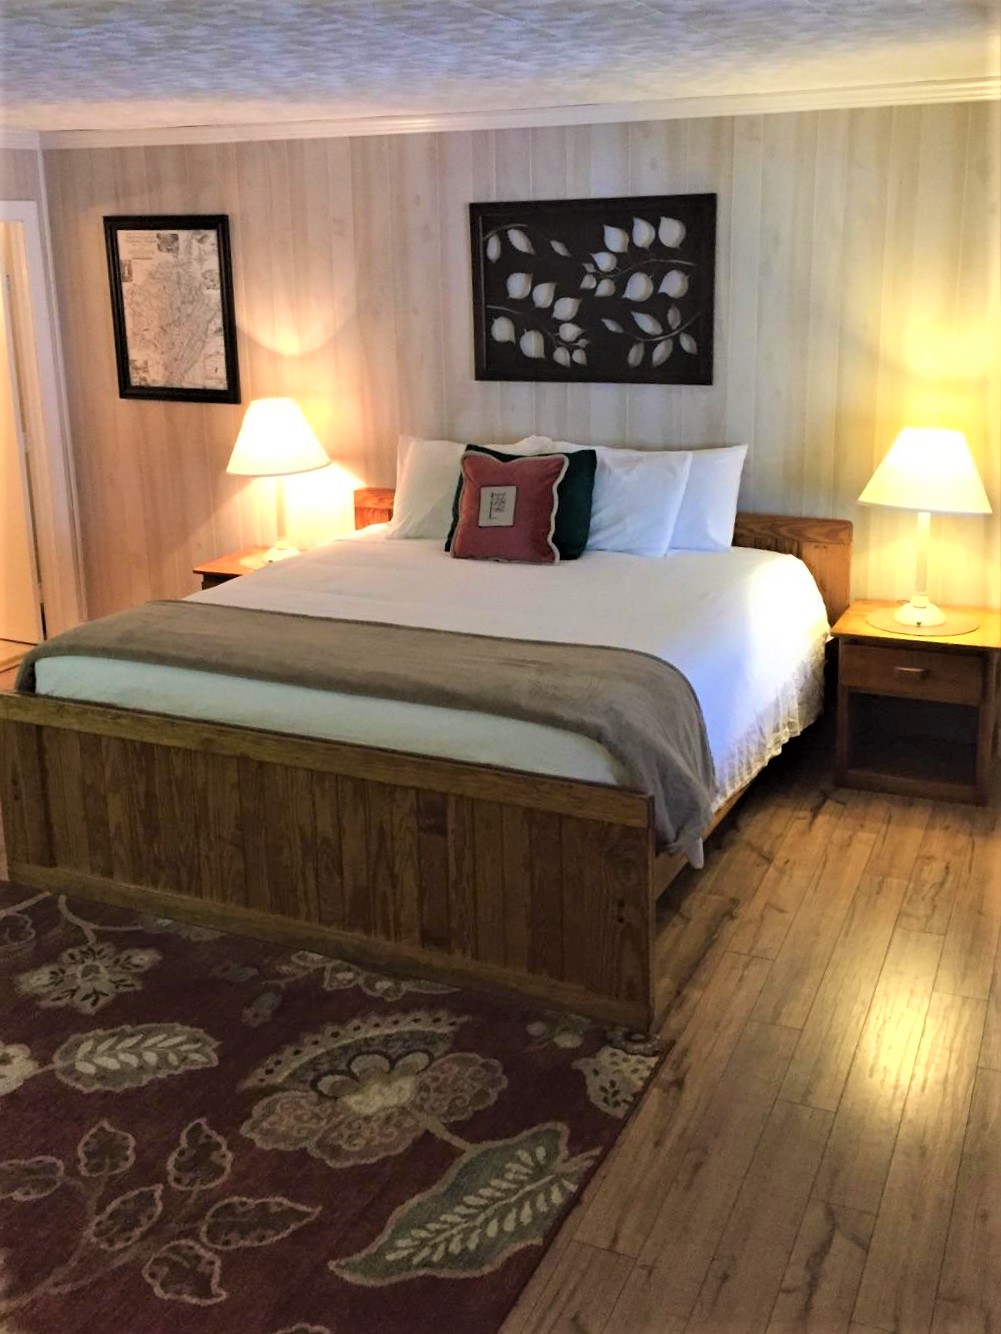 The Lodge Bed